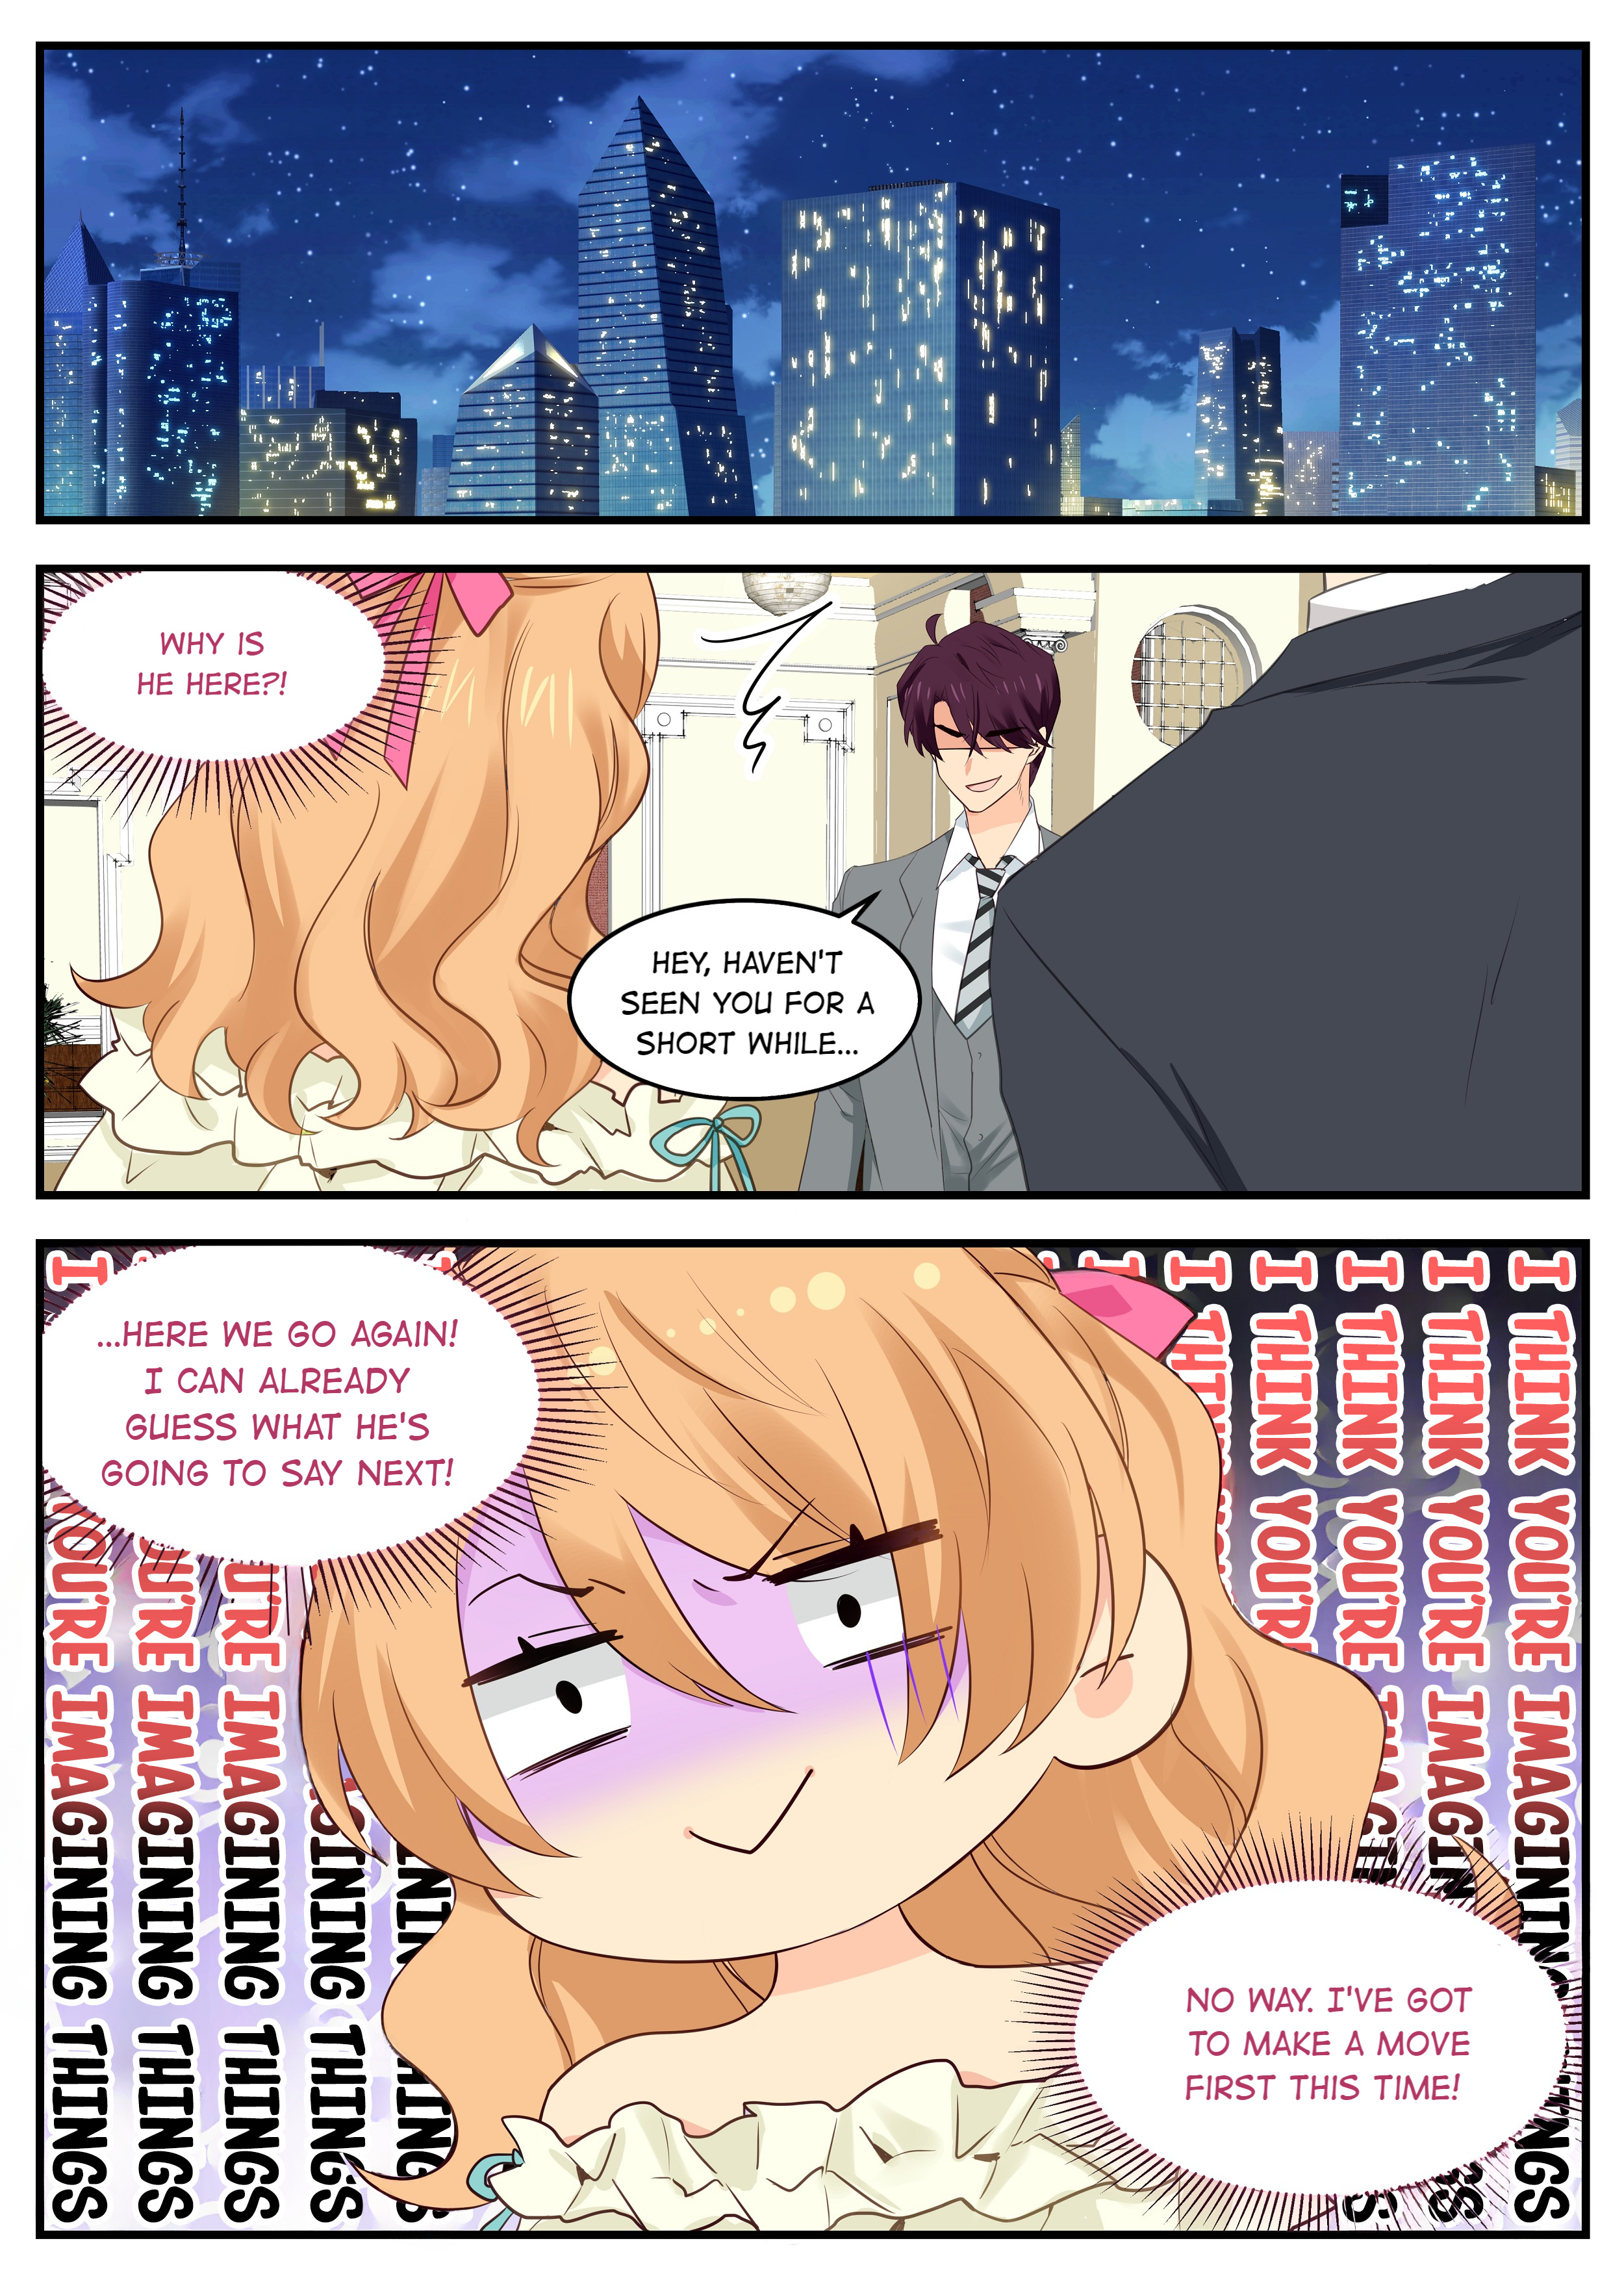 Married A Celebrity Manager - Page 1